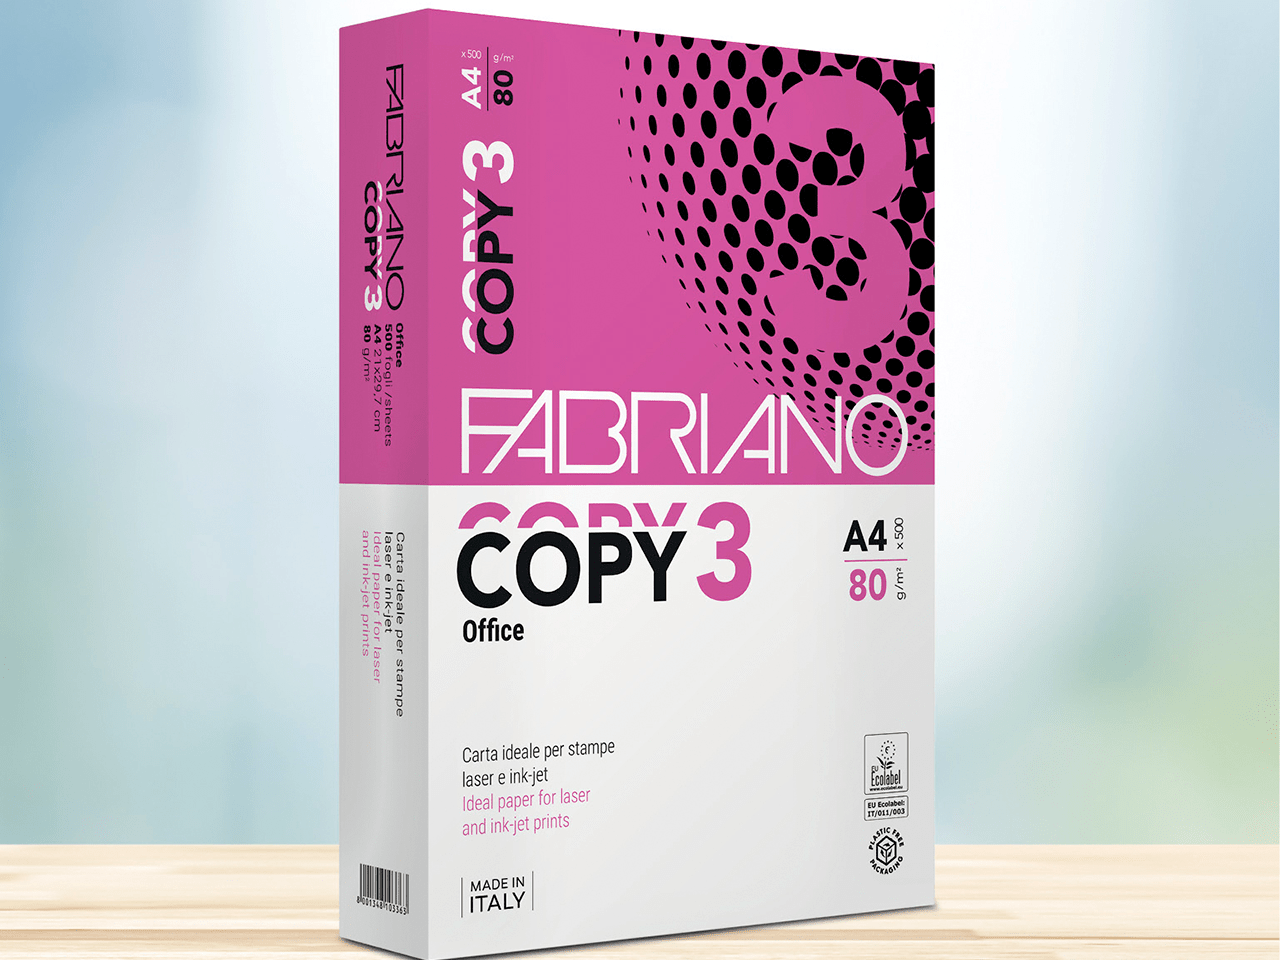 Copy 3, paper for photocopies, laser/inkjet printing, fax, office